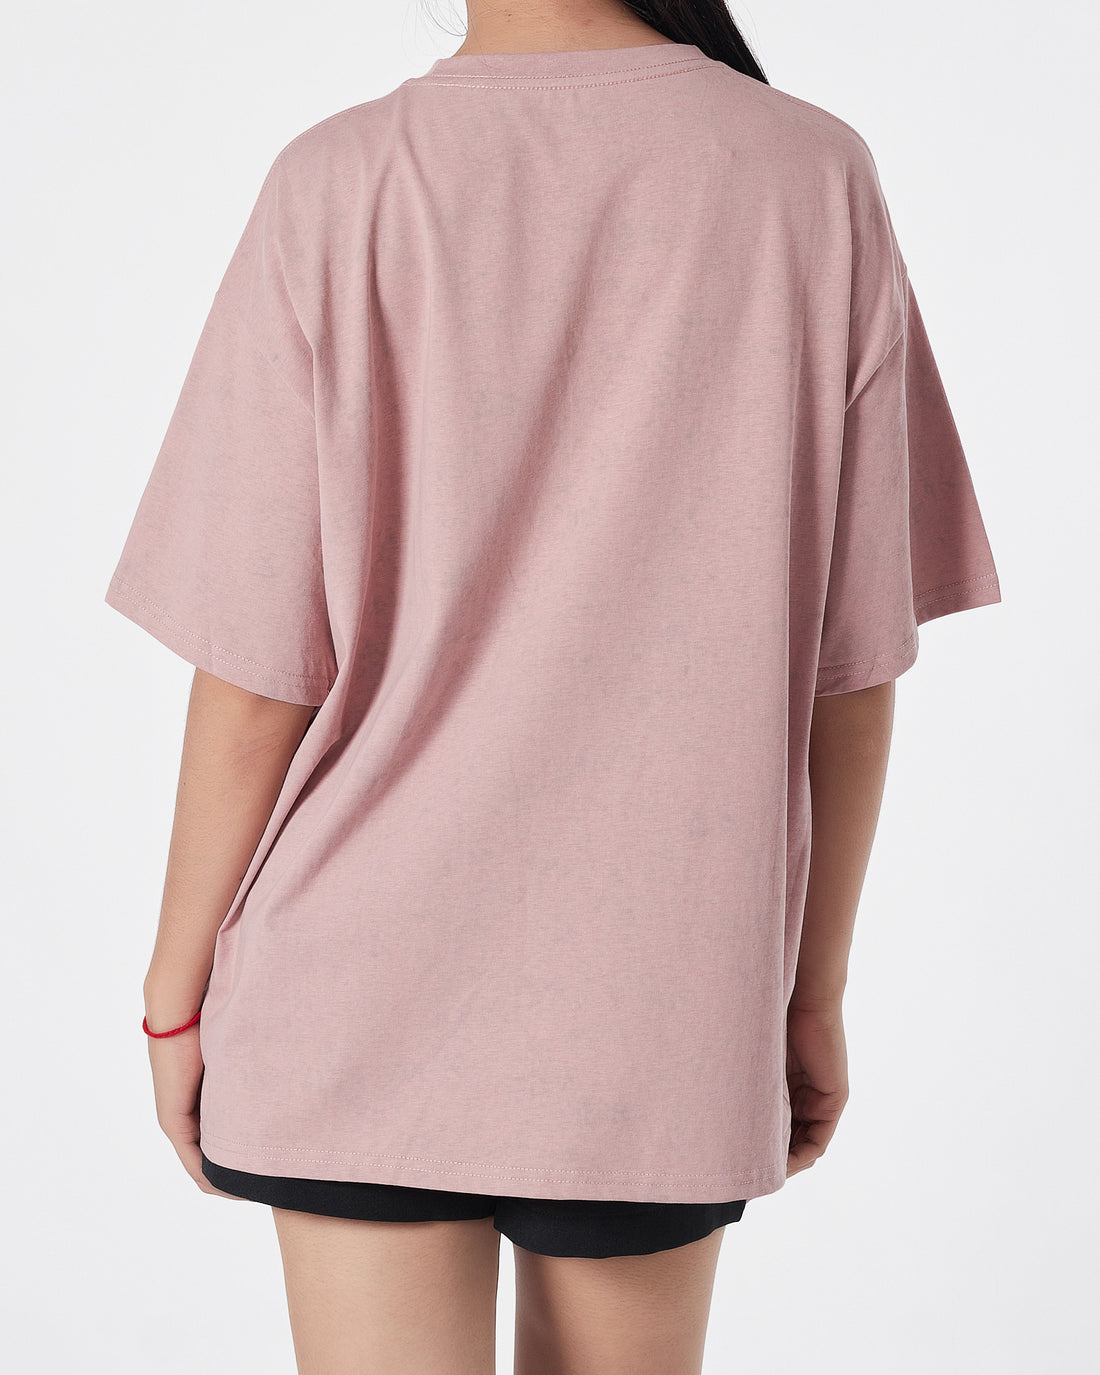 Unisex Over Size Pink T-Shirt 13.90